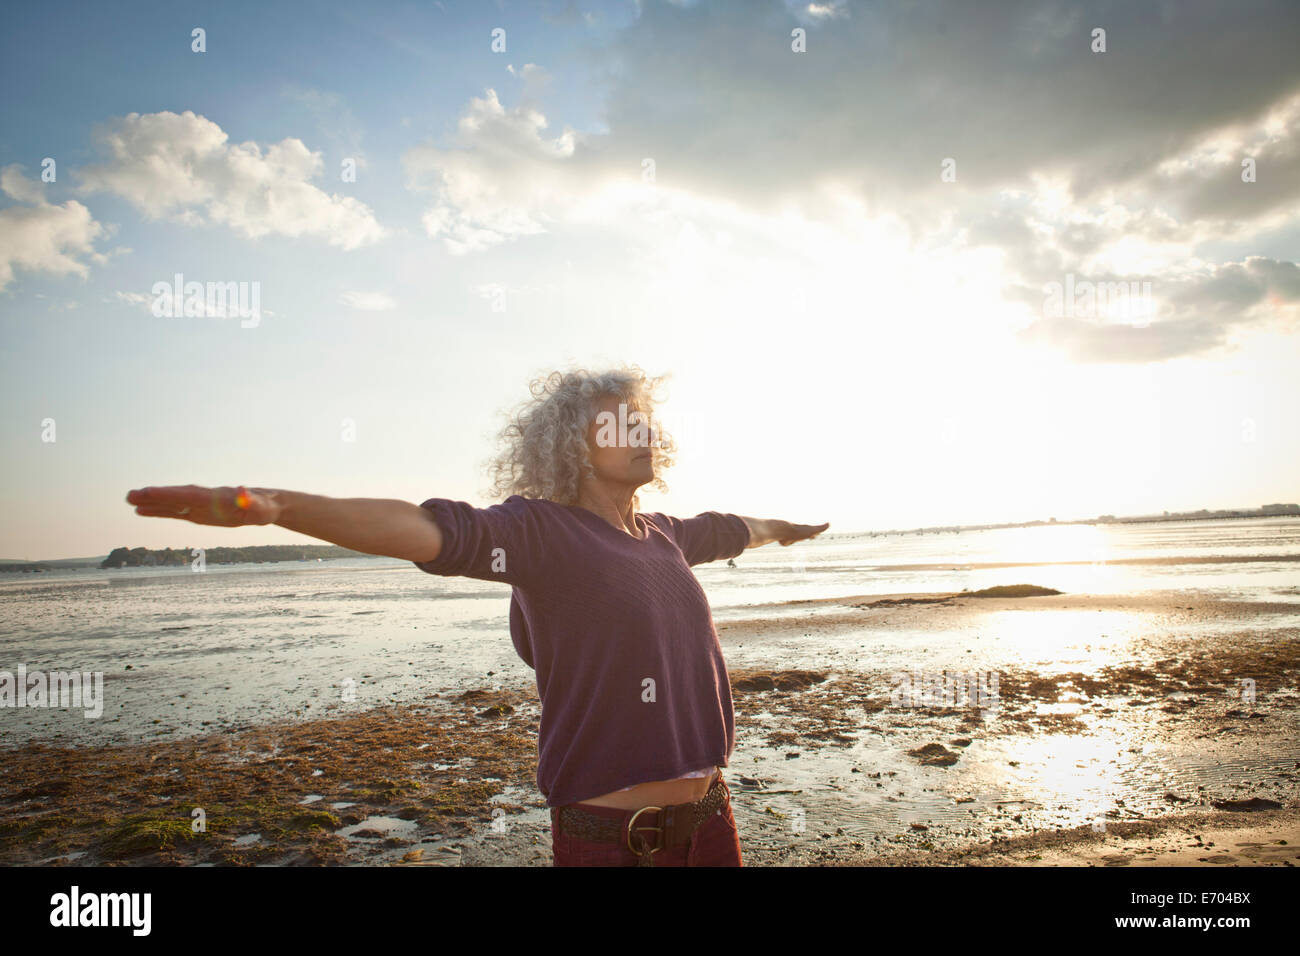 Young woman exercising on beach Banque D'Images